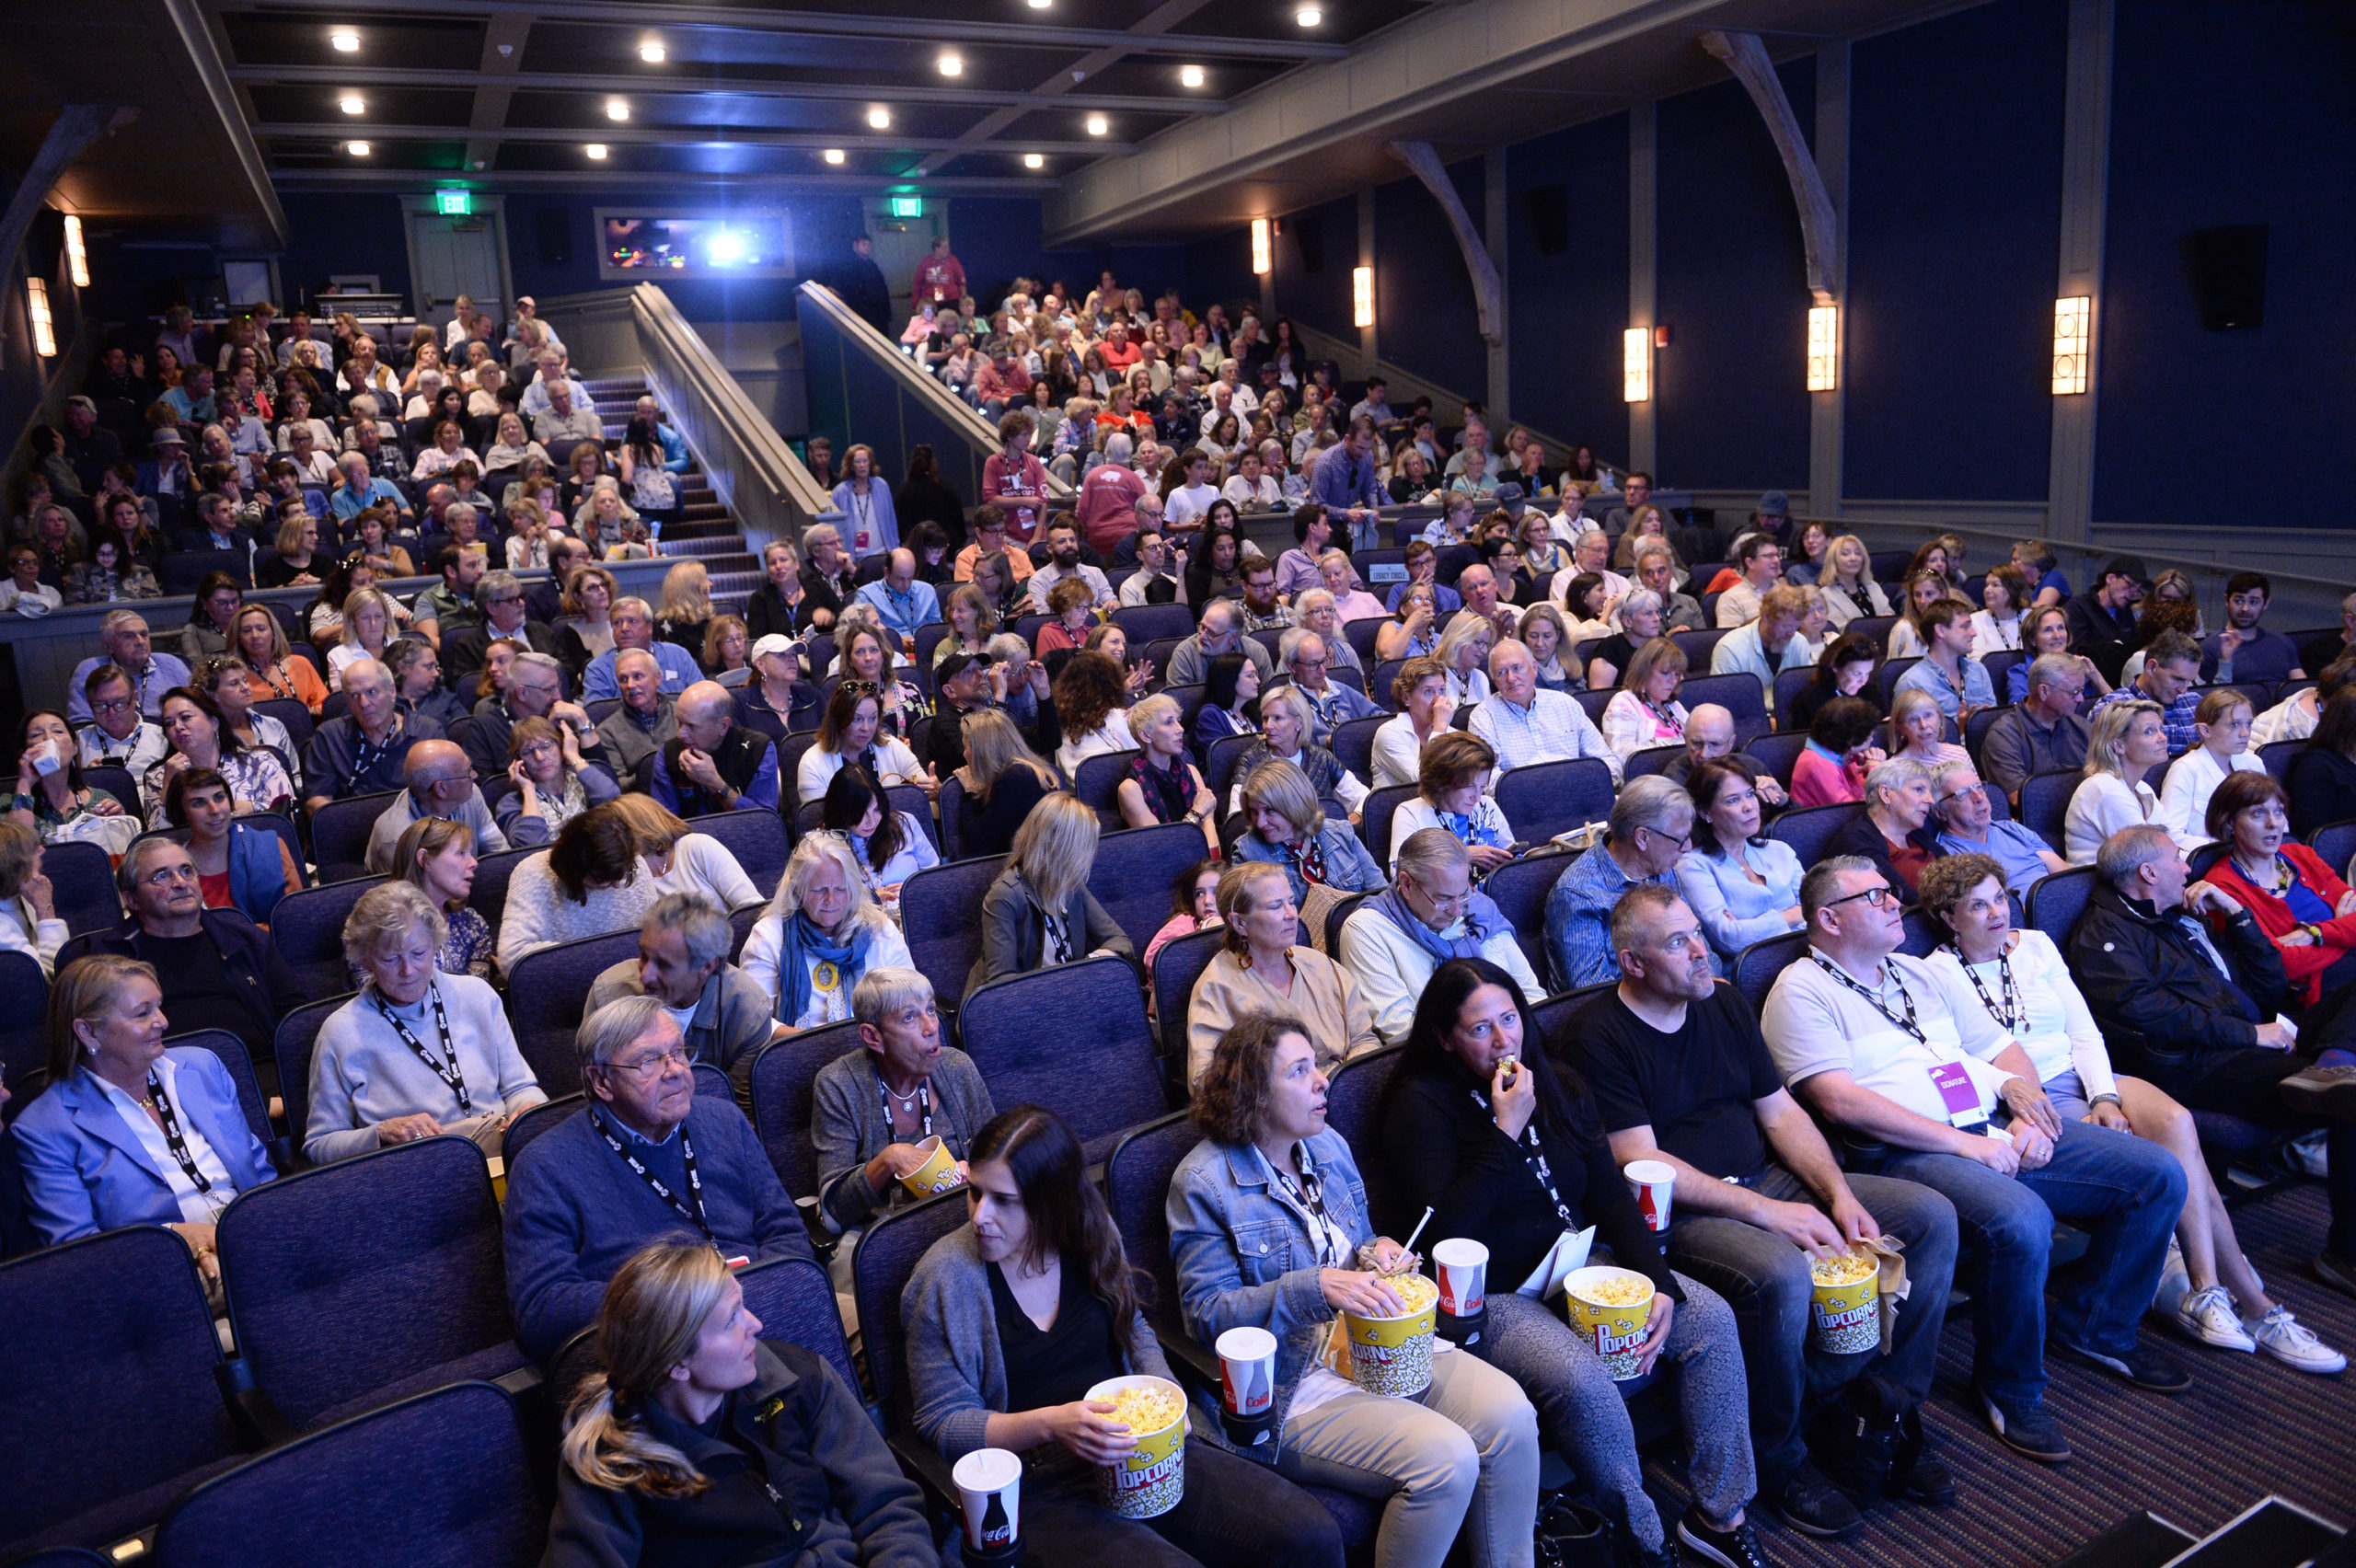 NANTUCKET, MASSACHUSETTS - JUNE 19:  Guests attend the screening of 'Yesterday' at the 2019 Nantucket Film Festival - Day One on June 19, 2019 in Nantucket, Massachusetts. (Photo by Noam Galai/Getty Images for the 2019 Nantucket Film Festival)